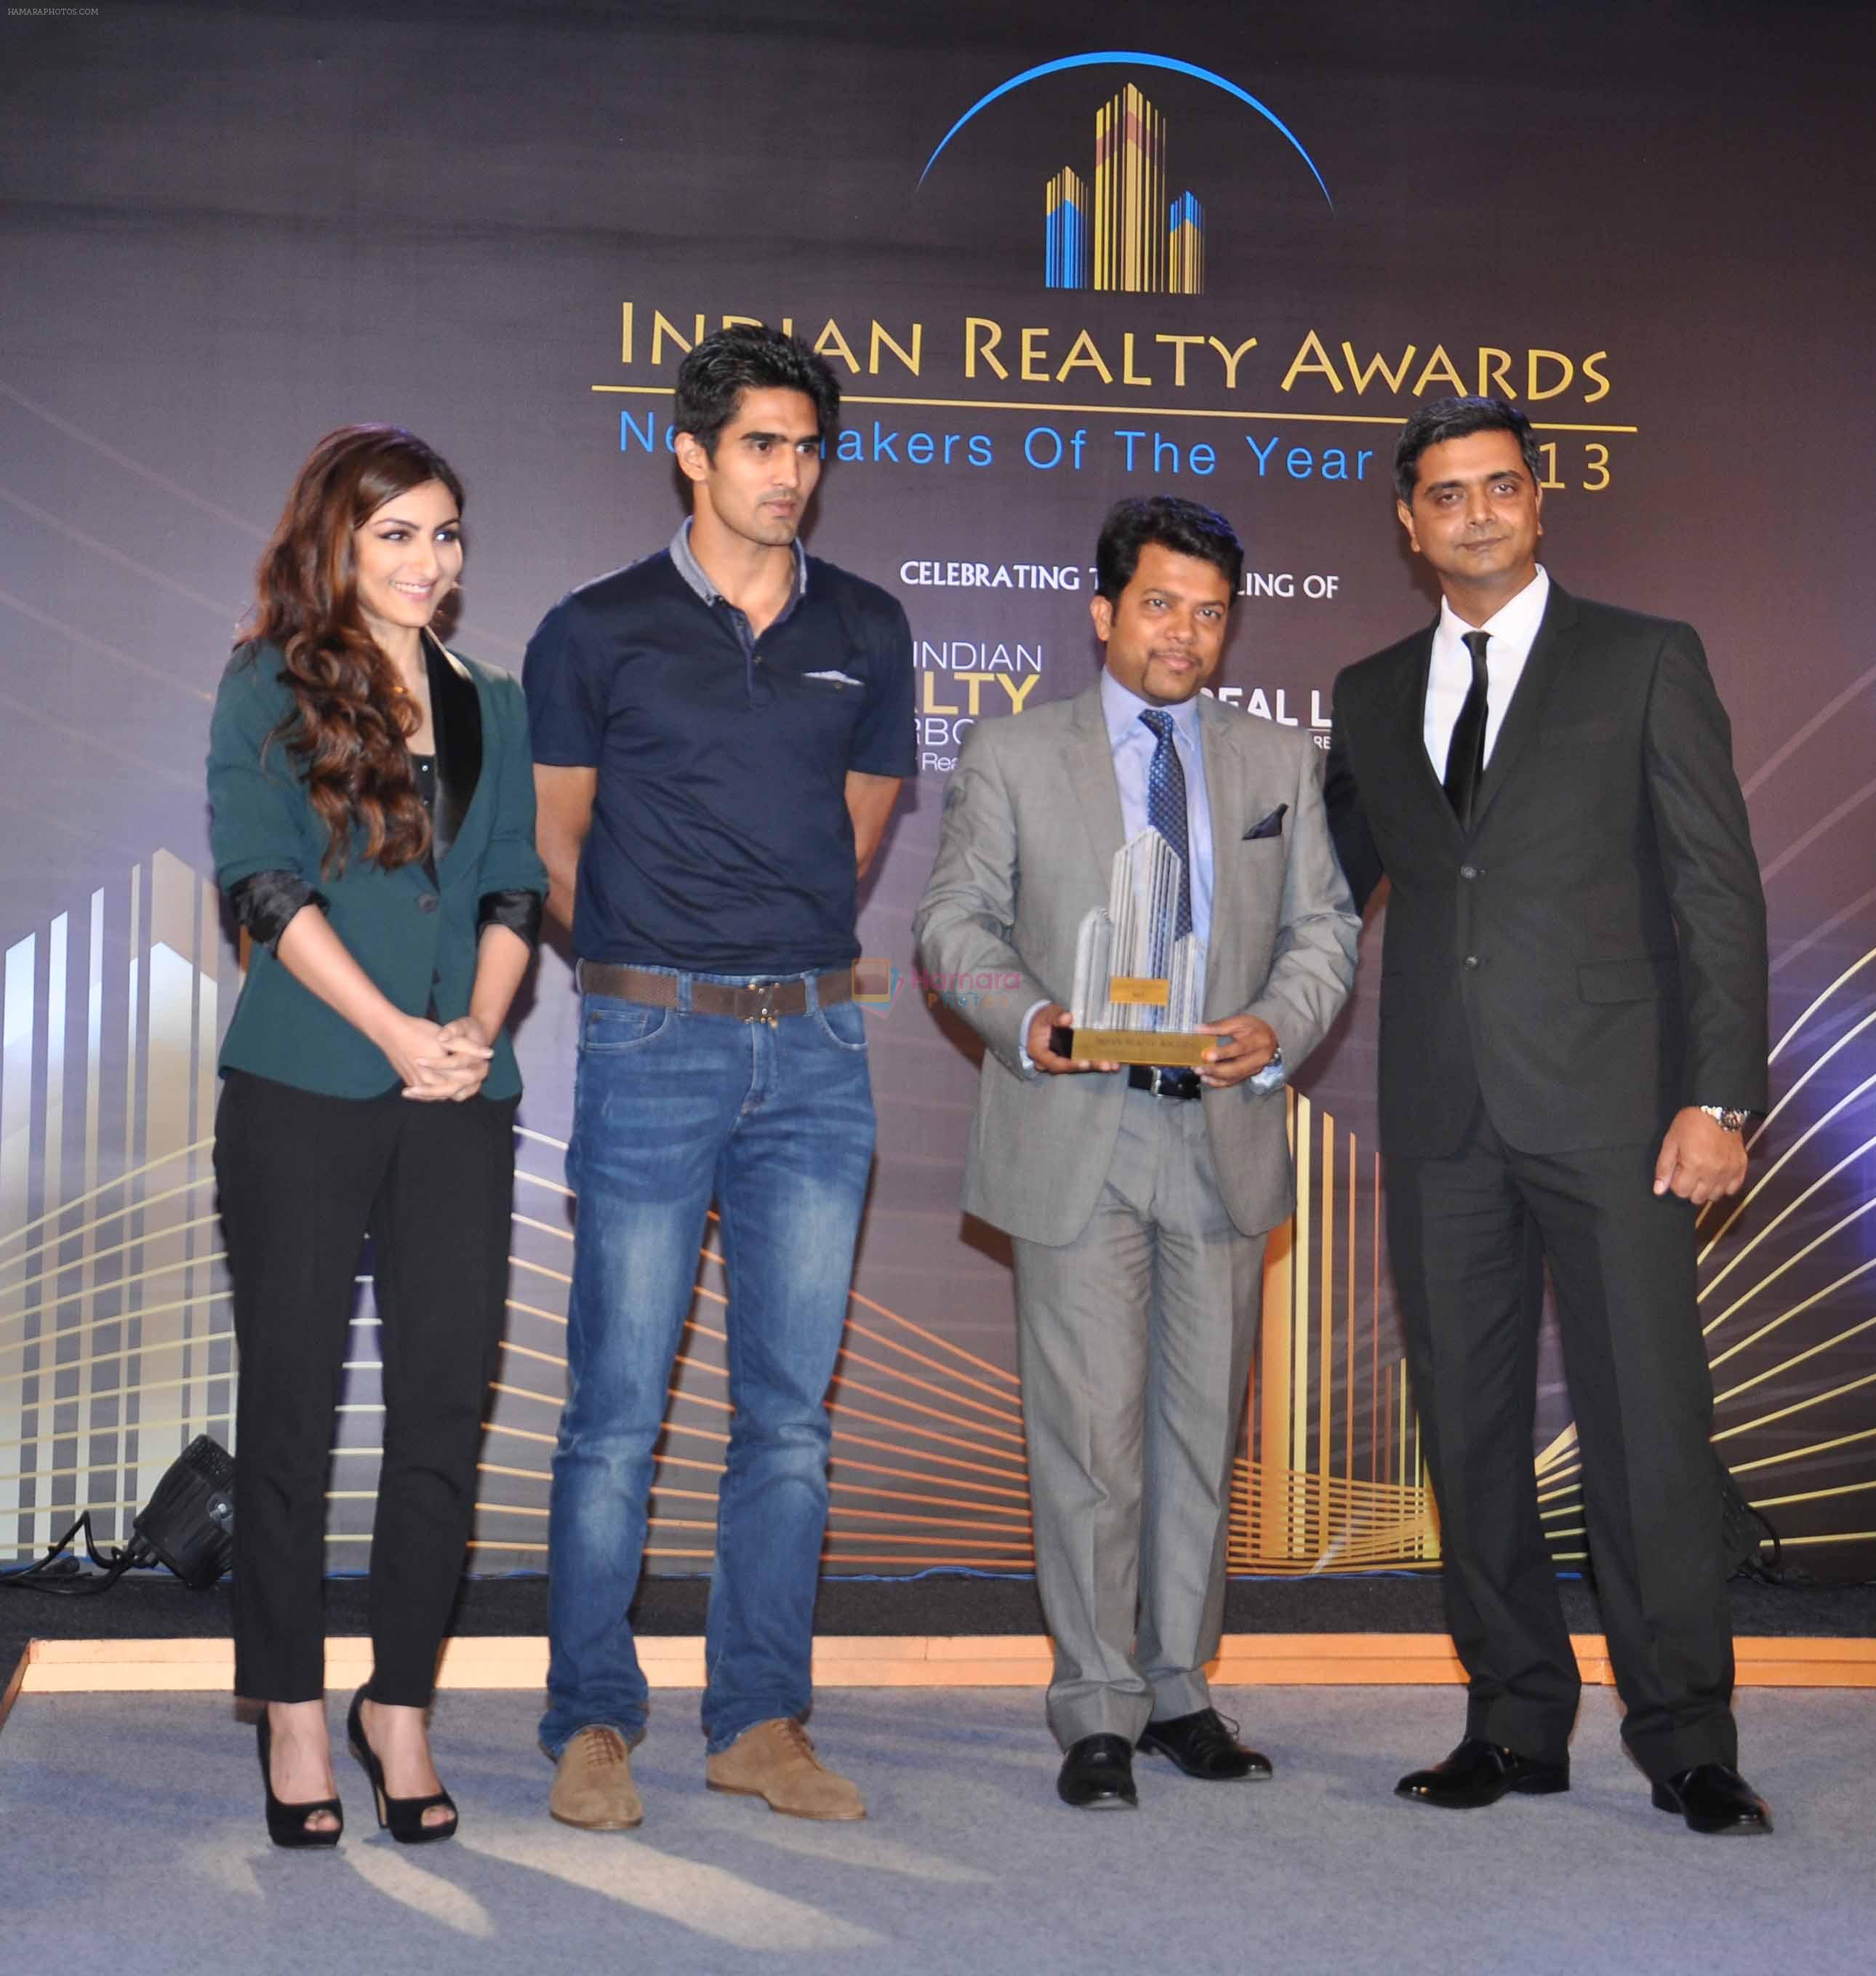 Soha Ali Khan, Vijender Singh launch India Realty Yearbook & Real Leaders at The premier Indian Realty Awards 2013 in New Delhi on 8th Oct 2013